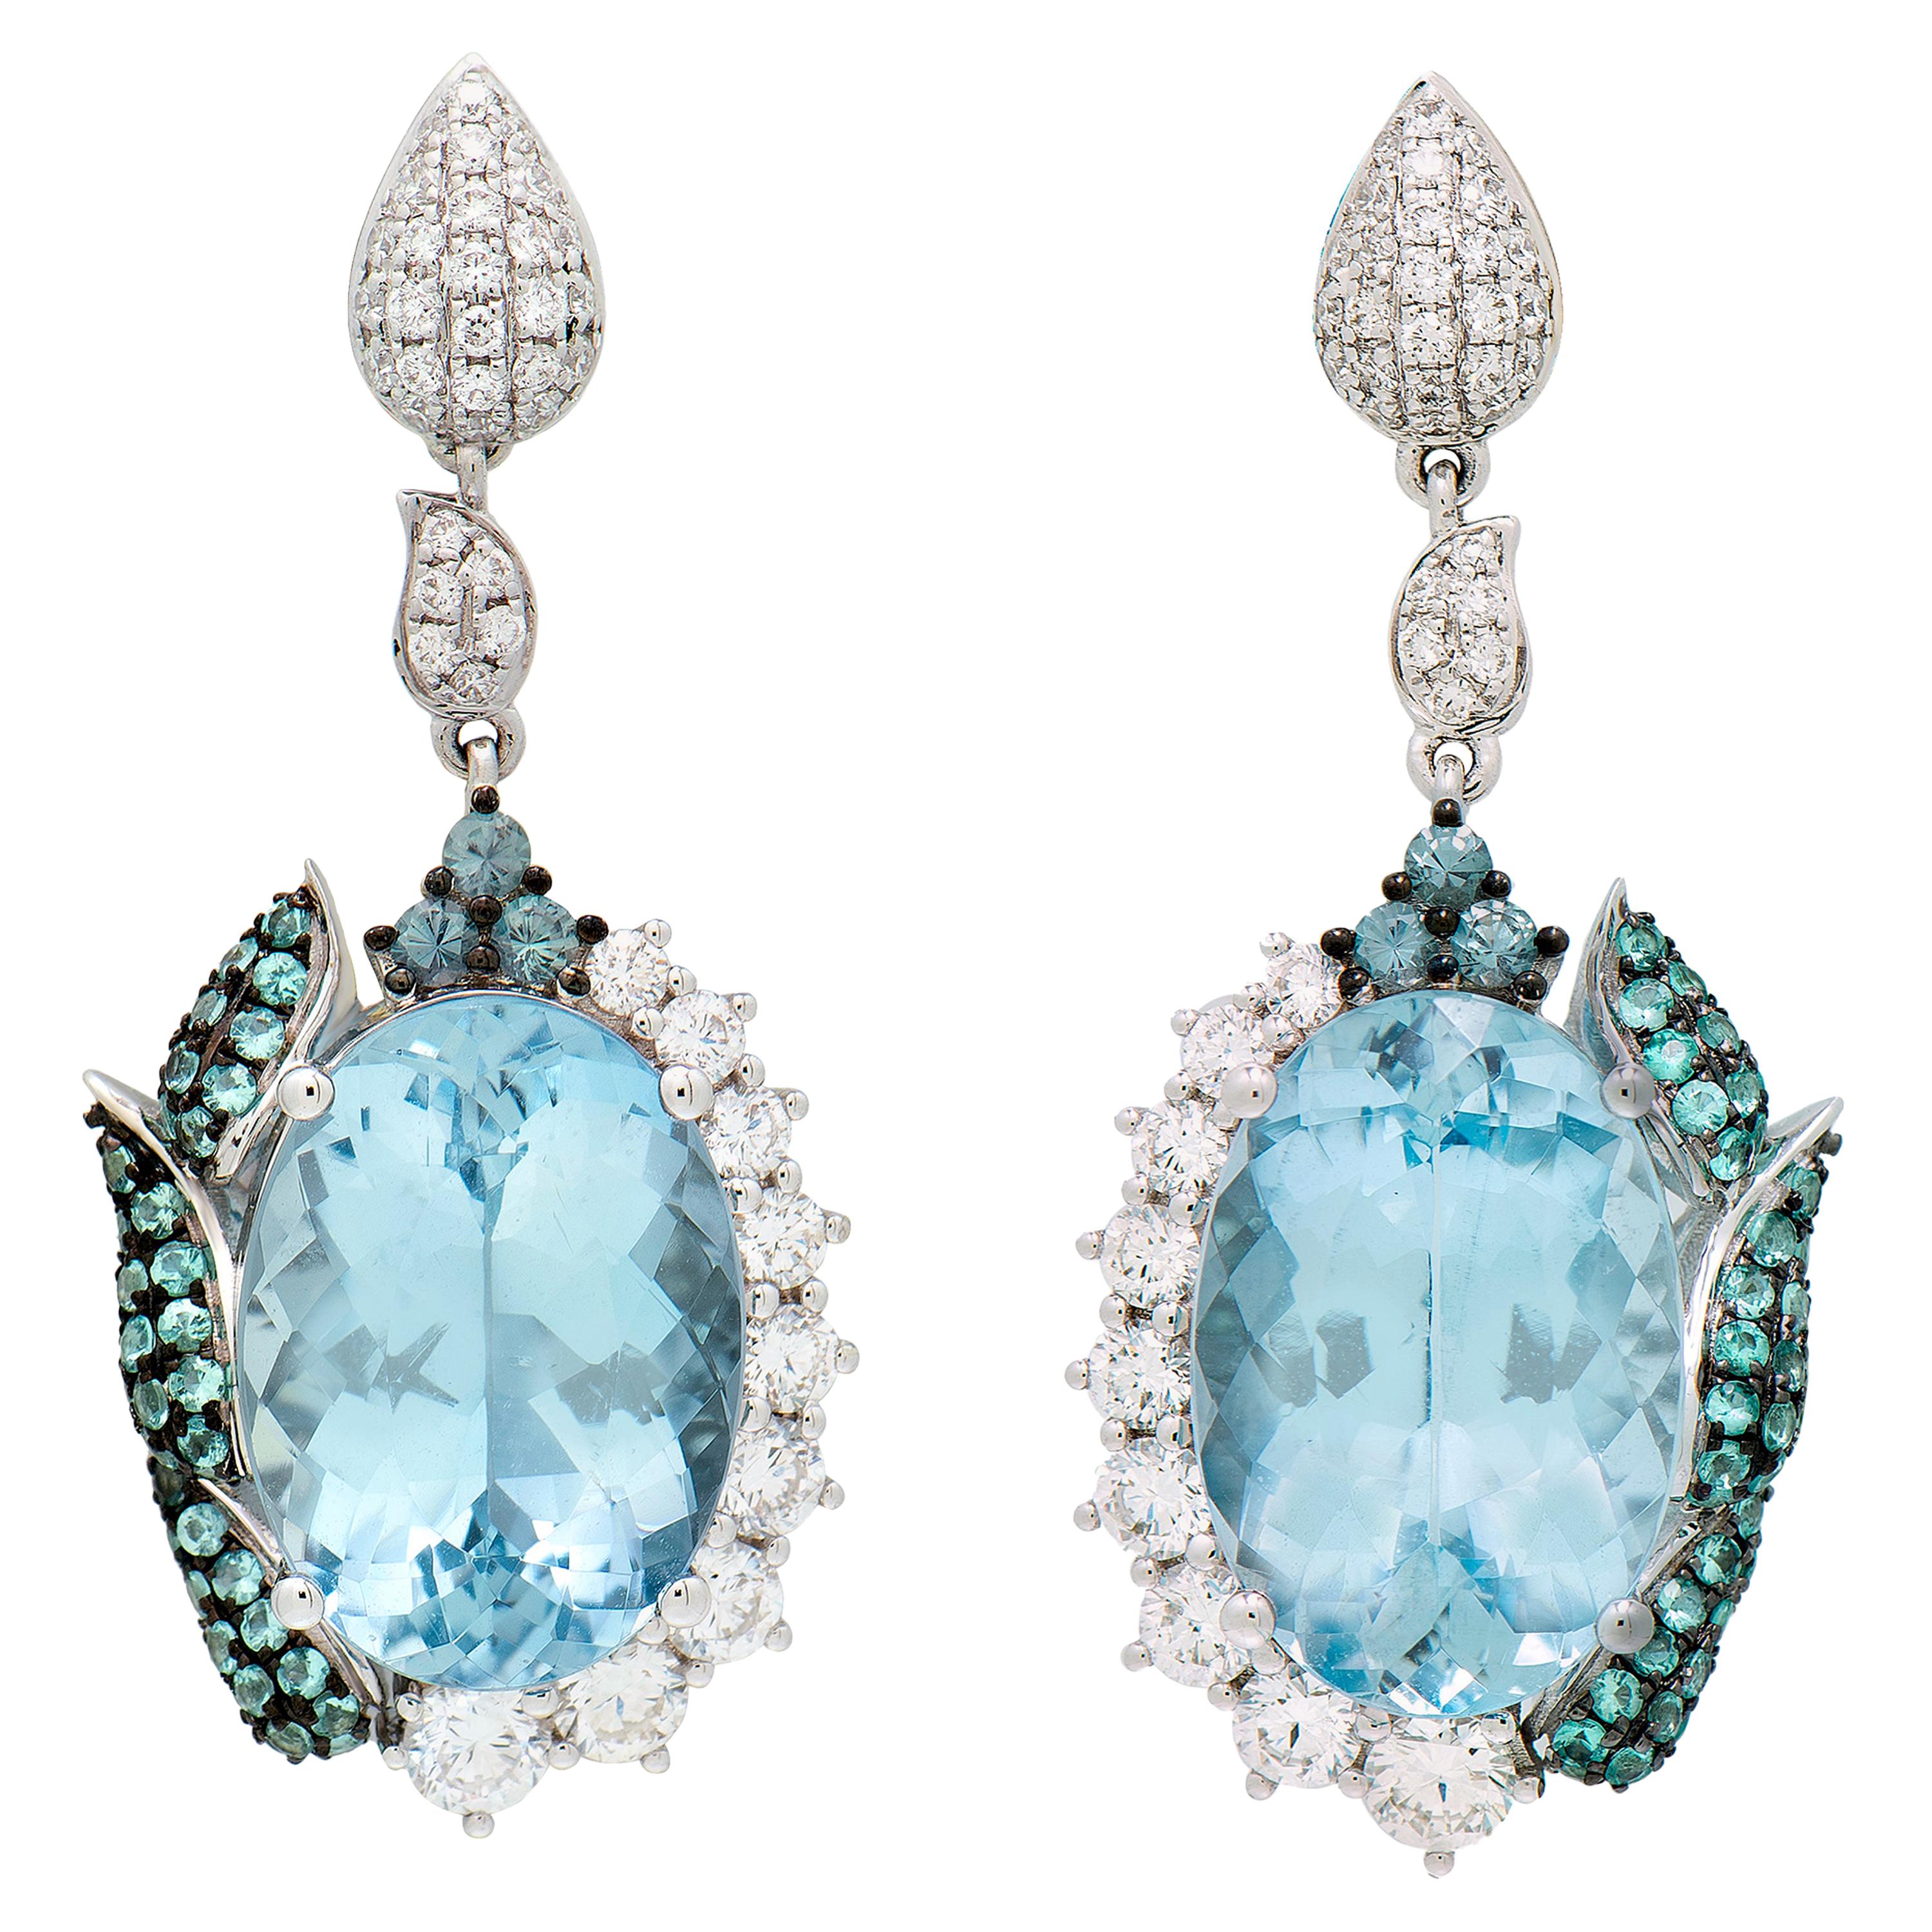 12.5 Carat Aquamarine Earrings in 18 Karat Gold with Paraiba and Alexandrite For Sale